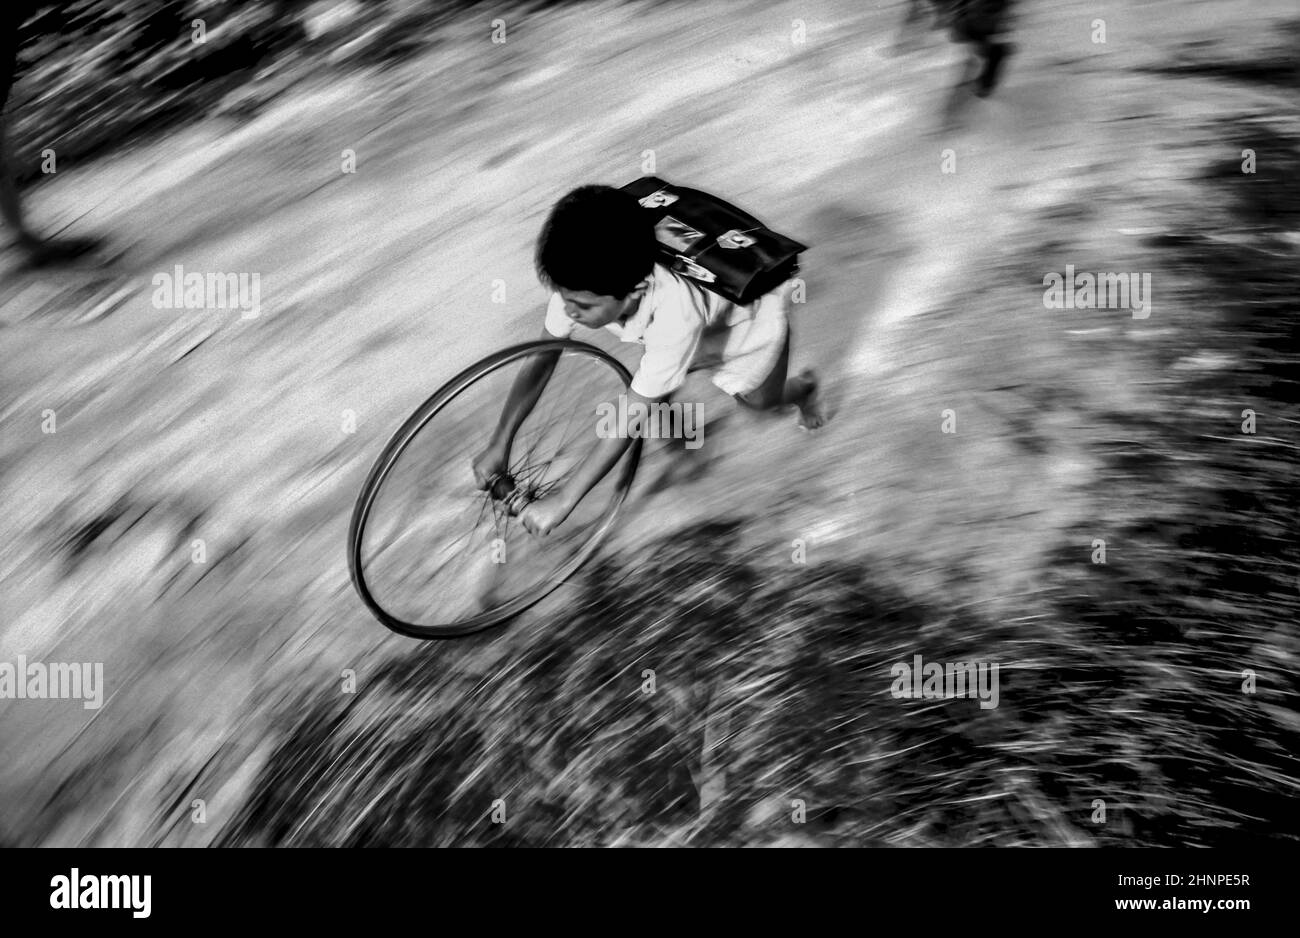 boy in school uniform runs back home playing with a wheel of a bicycle Stock Photo